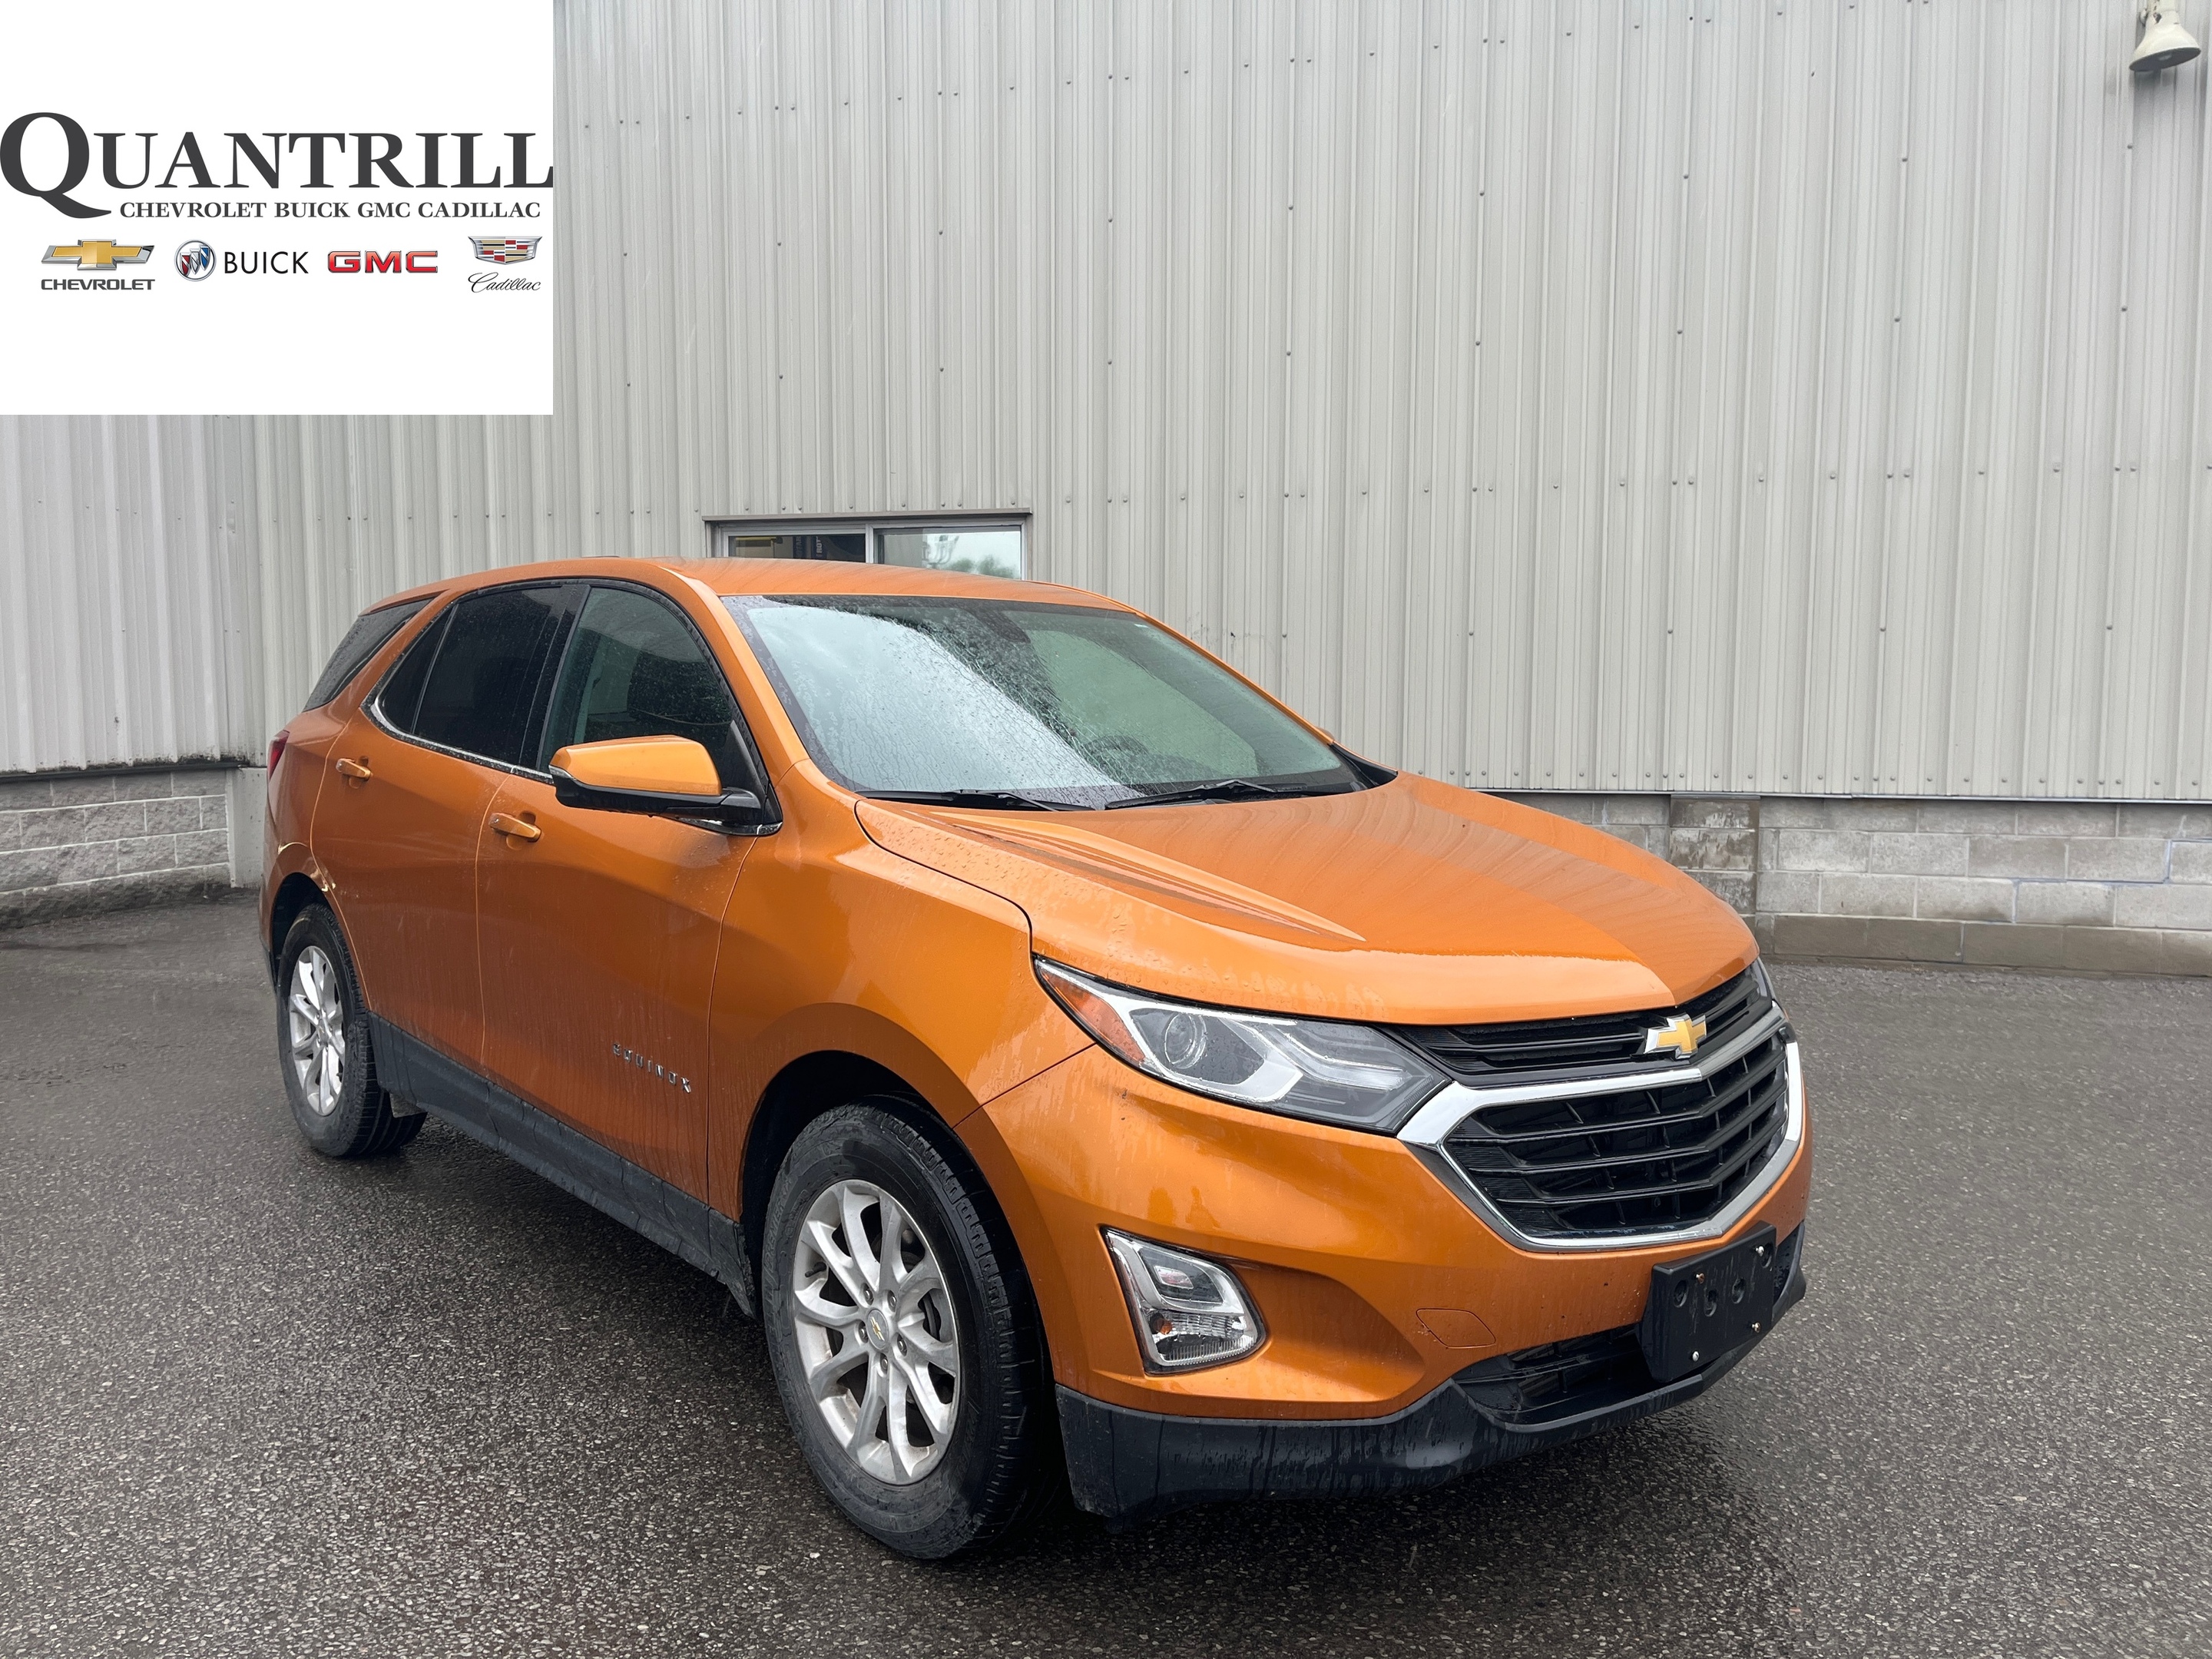 2019 Chevrolet Equinox LT + 1.5L + Heated Seats + One Owner